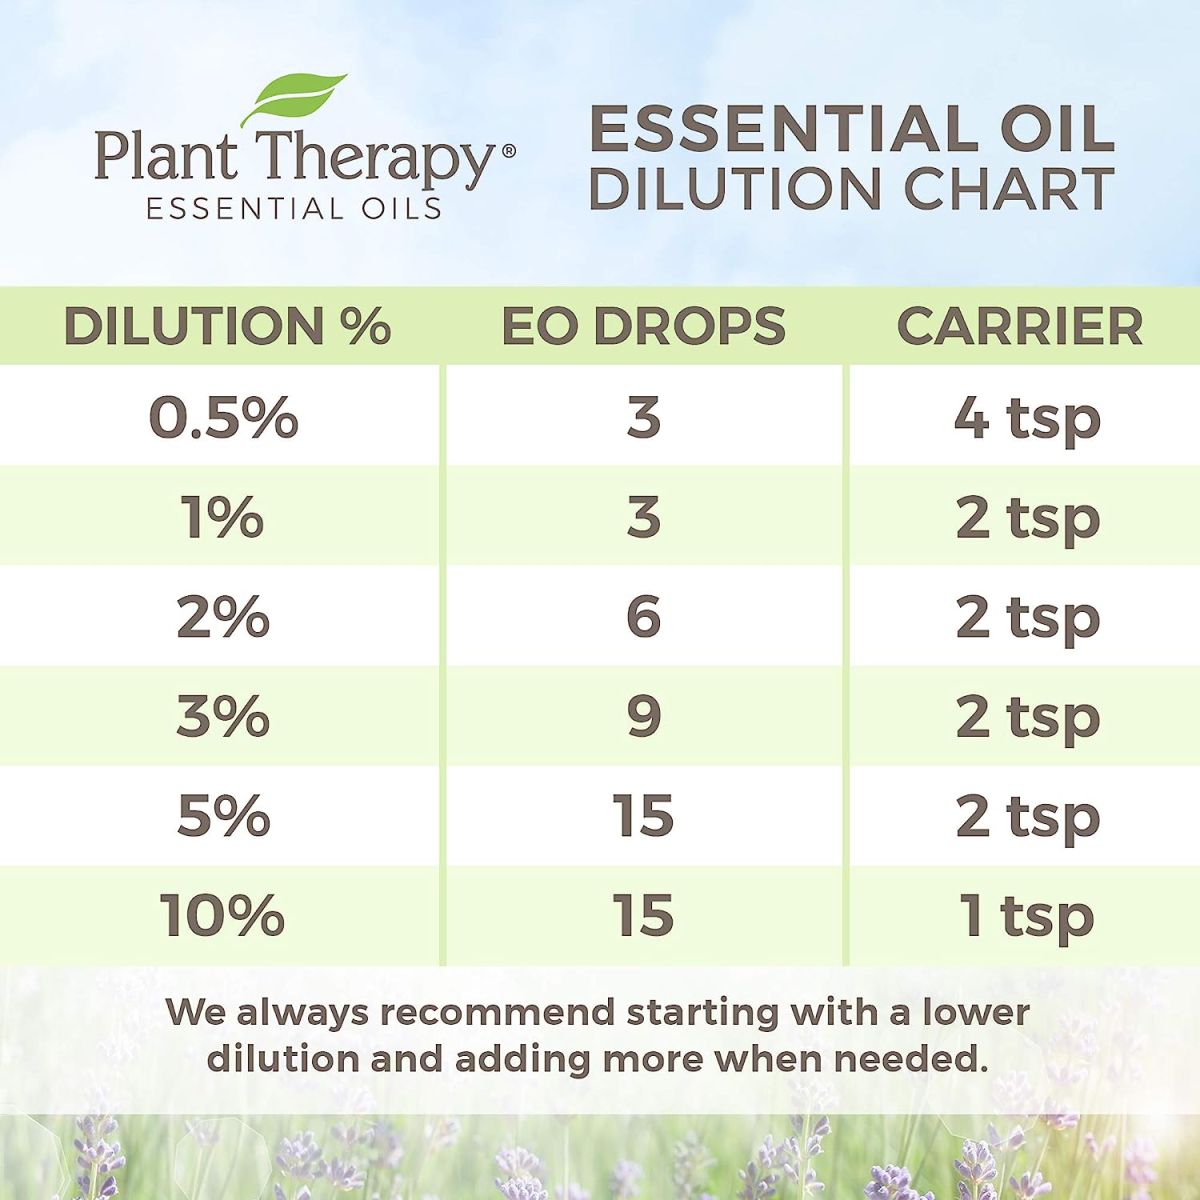 Plant Therapy Basil Linalool Essential Oil 10 mL (1/3 oz) 100% Pure, Undiluted, Therapeutic Grade